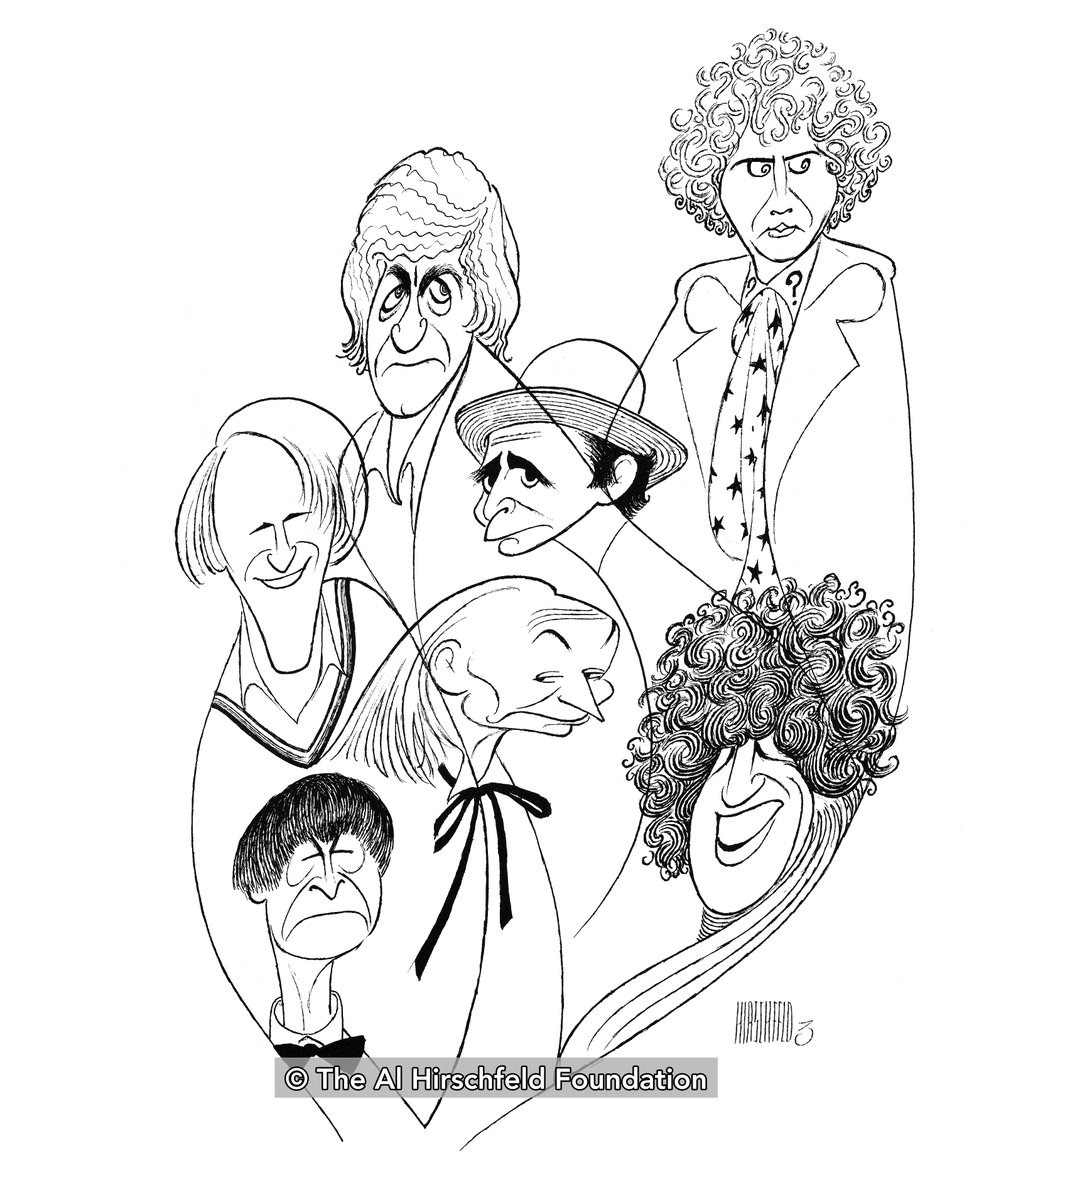 Welcome Back @bbcdoctorwho! Which Doctor is your favorite? Image: Dr. Who, 1990 Ft. William Hartnell, Patrick Troughton, Jon Pertwee, Tom Baker, Peter Davison, Colin Baker, and Sylvester McCoy #DrWho #TV #DoctorWho #Drawing #Hirschfeld